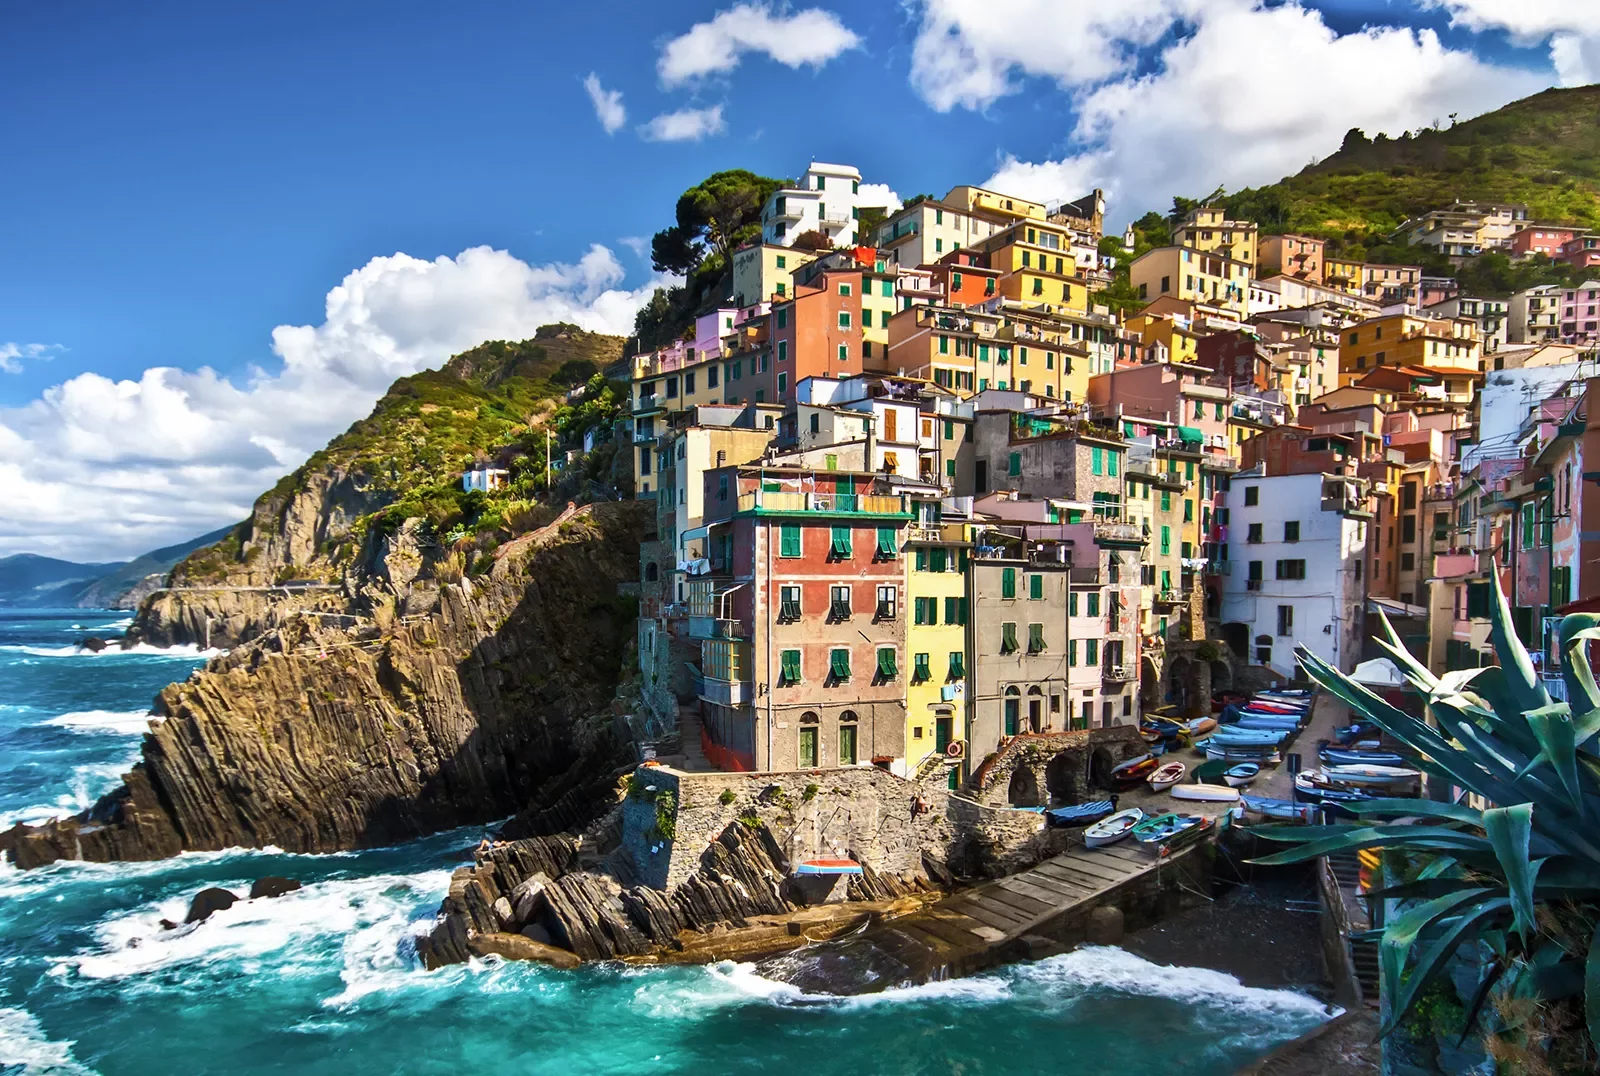 Wide shot of Cinque Terre houses, small pier and ocean down below.